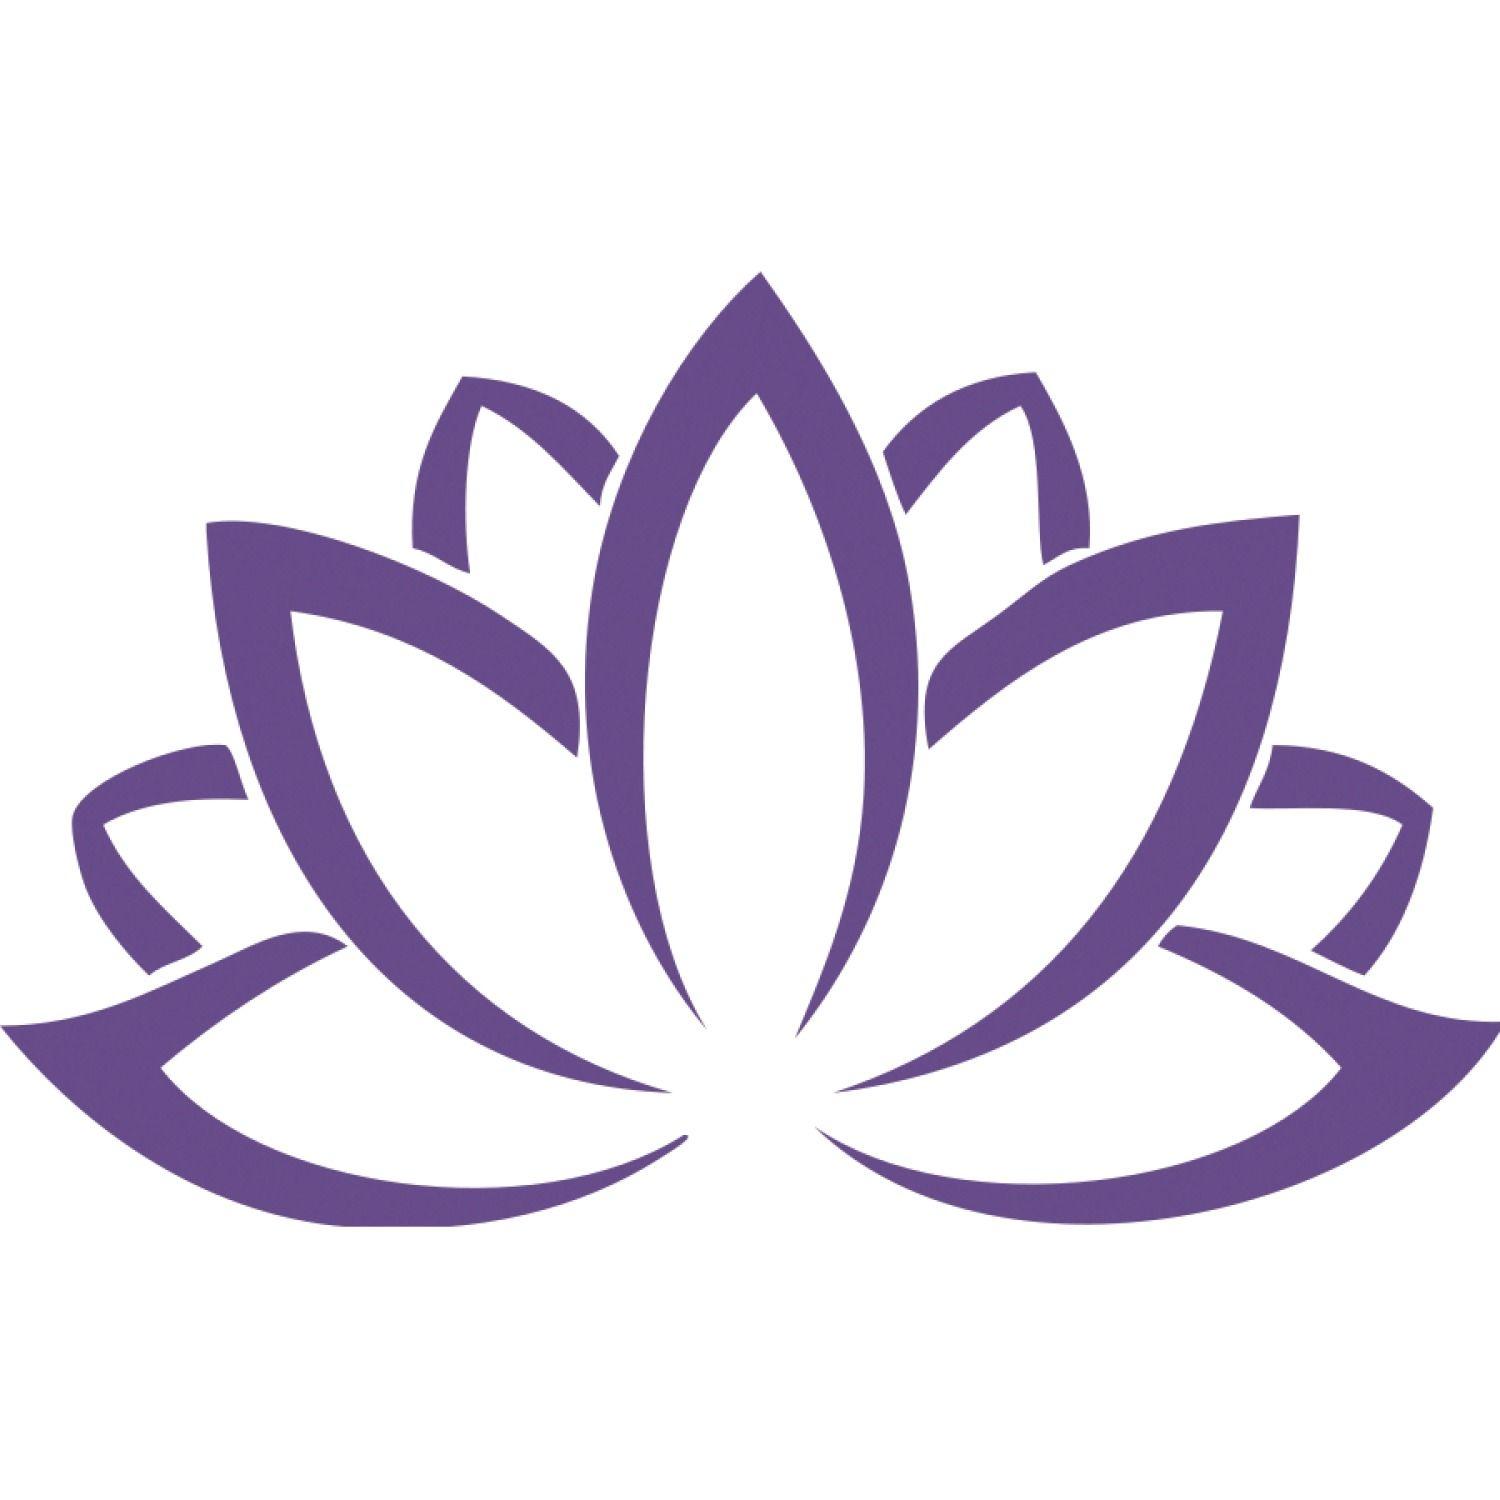 Lotus Flower Graphic Logo - Lotus Flower Graphic Decal Sized Personalized